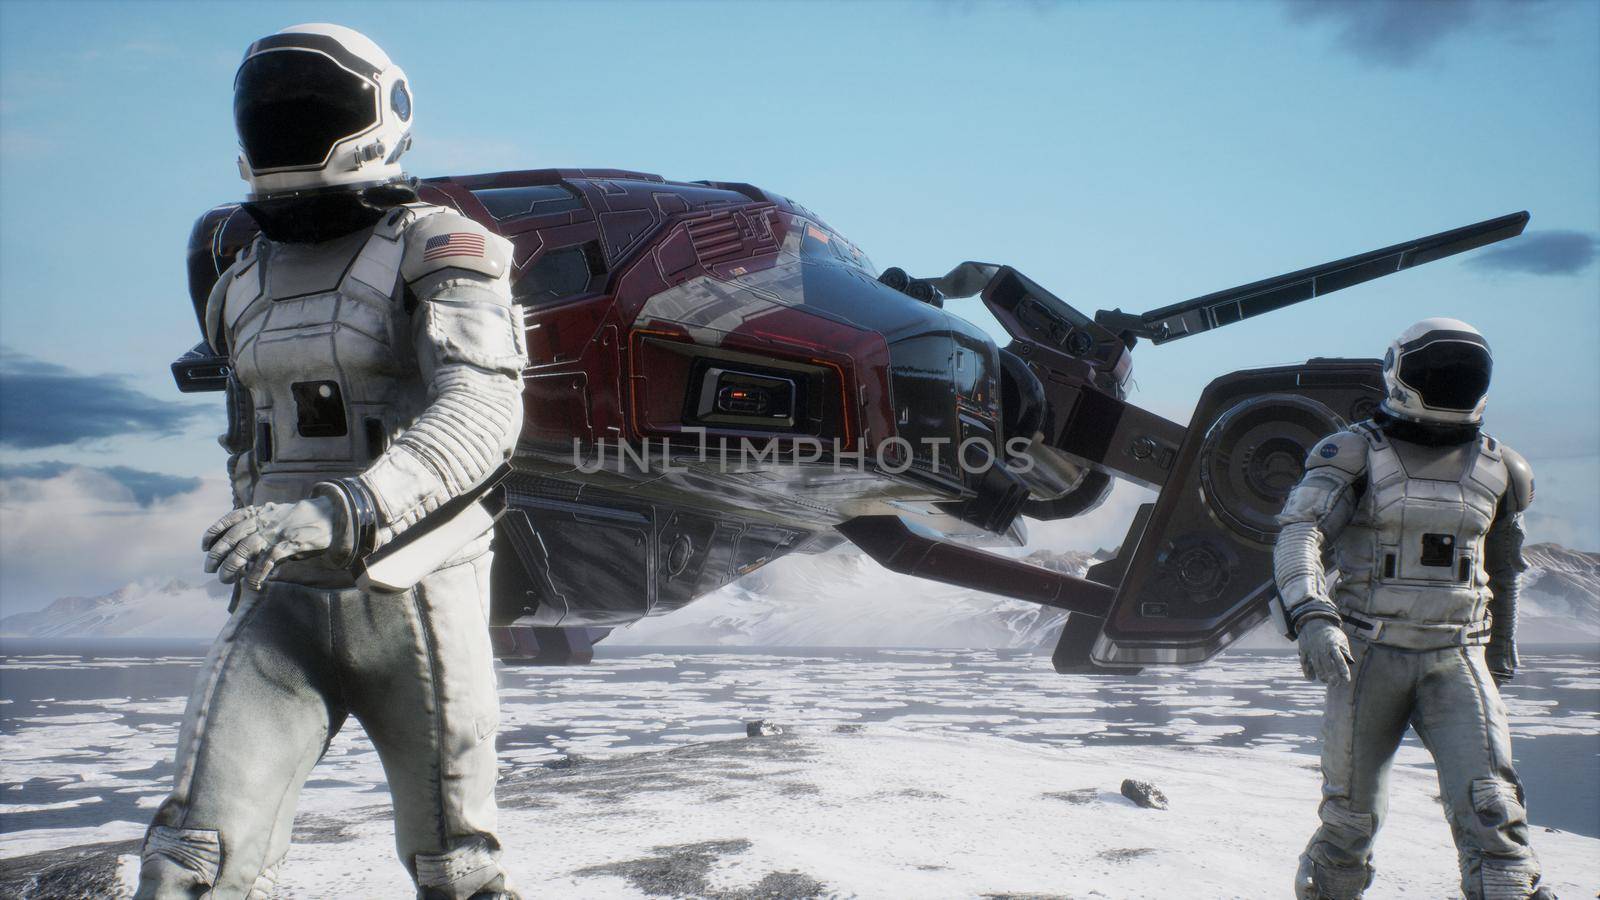 An astronaut-scientist studies a new unusual planet covered with ice and snow. 3D Rendering. by designprojects